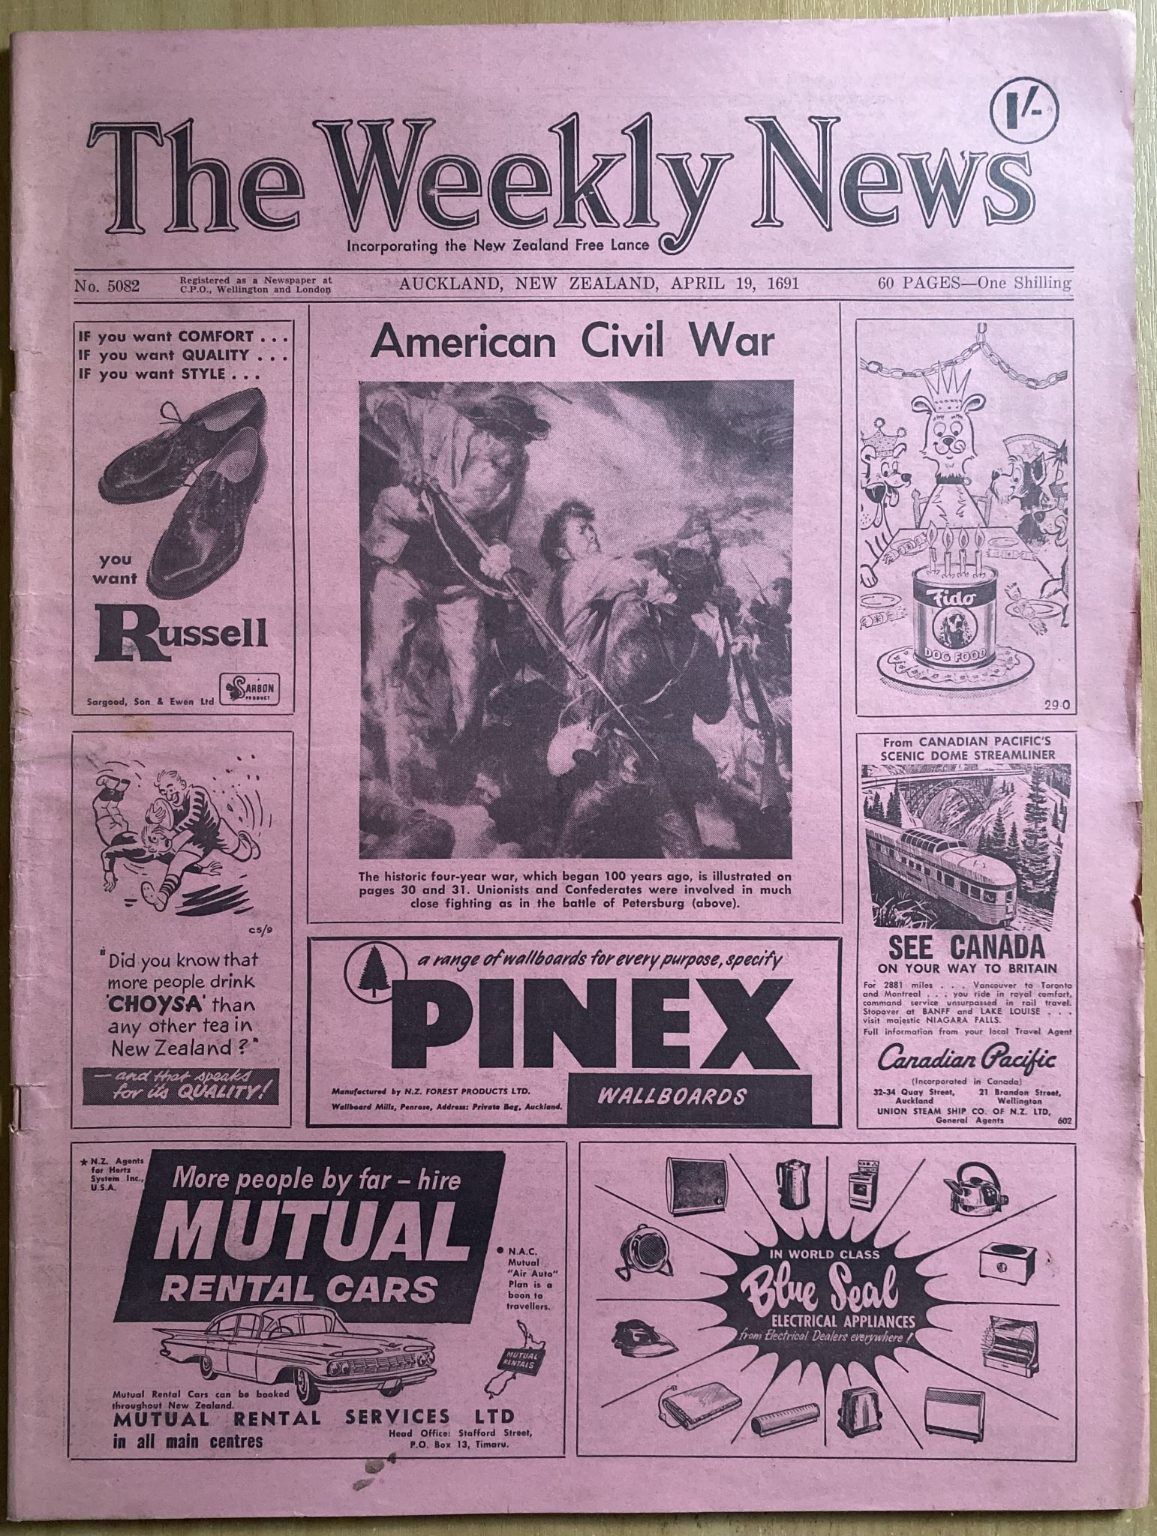 OLD NEWSPAPER: The Weekly News, No. 5082, 19 April 1961